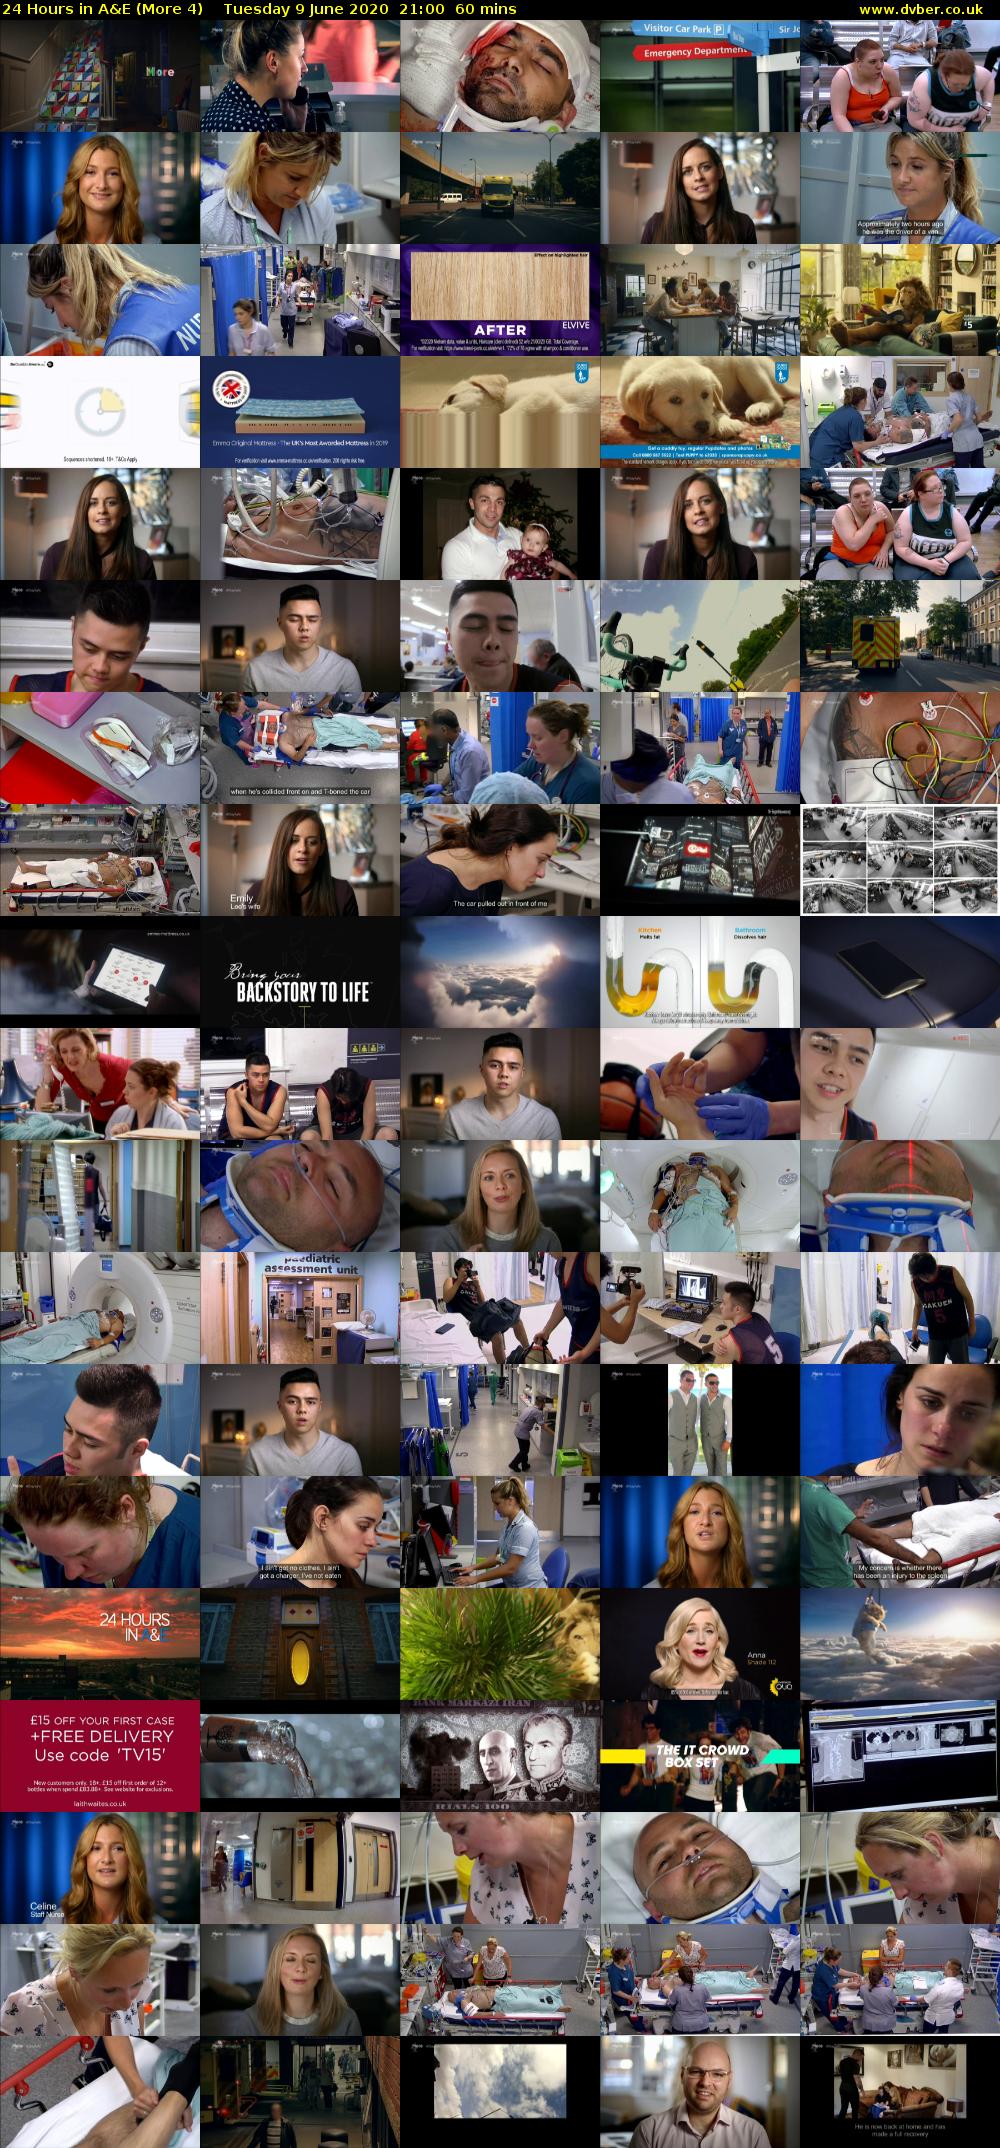 24 Hours in A&E (More 4) Tuesday 9 June 2020 21:00 - 22:00